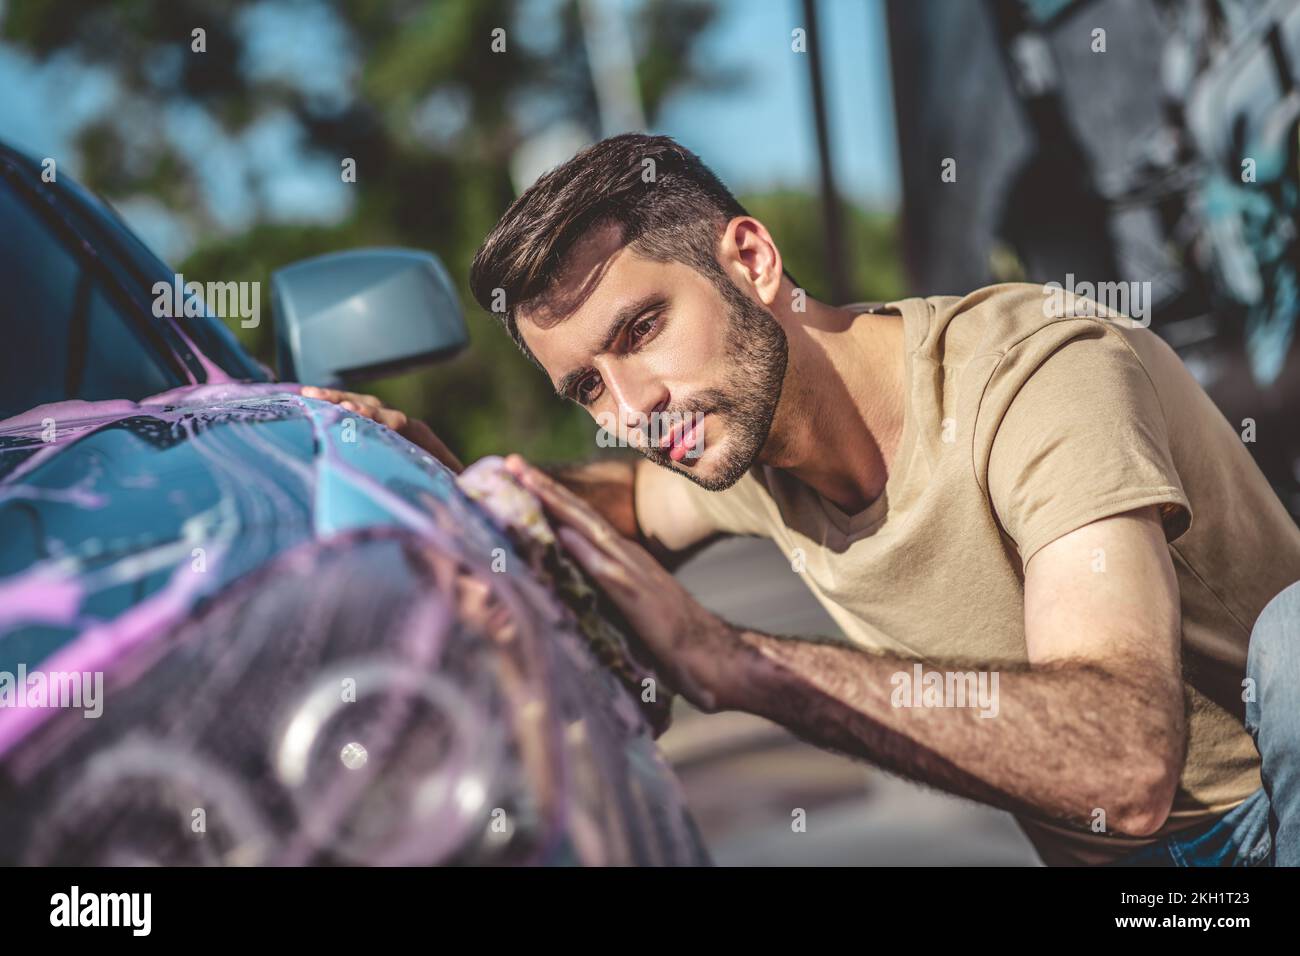 Concentrated service station worker washing a client vehicle Stock Photo